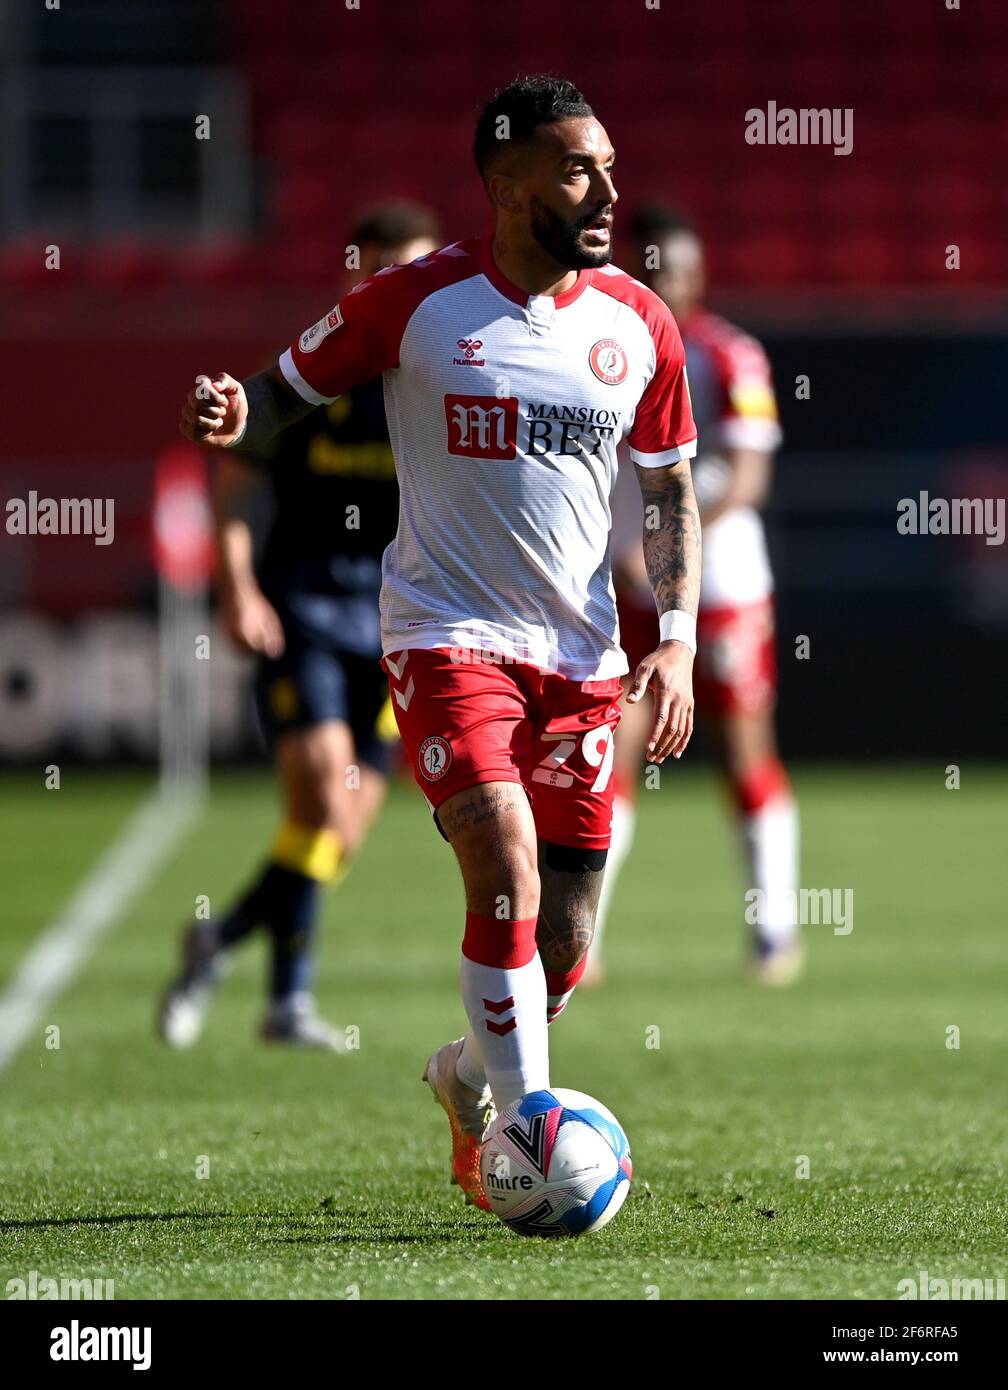 Bristol City's Danny Simpson during the Sky Bet Championship match at Ashton Gate, Bristol. Picture date: Friday April 2, 2021. See PA story: SOCCER Bristol City. Photo credit should read: Simon Galloway/PA Wire. RESTRICTIONS: EDITORIAL USE ONLY No use with unauthorised audio, video, data, fixture lists, club/league logos or 'live' services. Online in-match use limited to 120 images, no video emulation. No use in betting, games or single club/league/player publications. Stock Photo